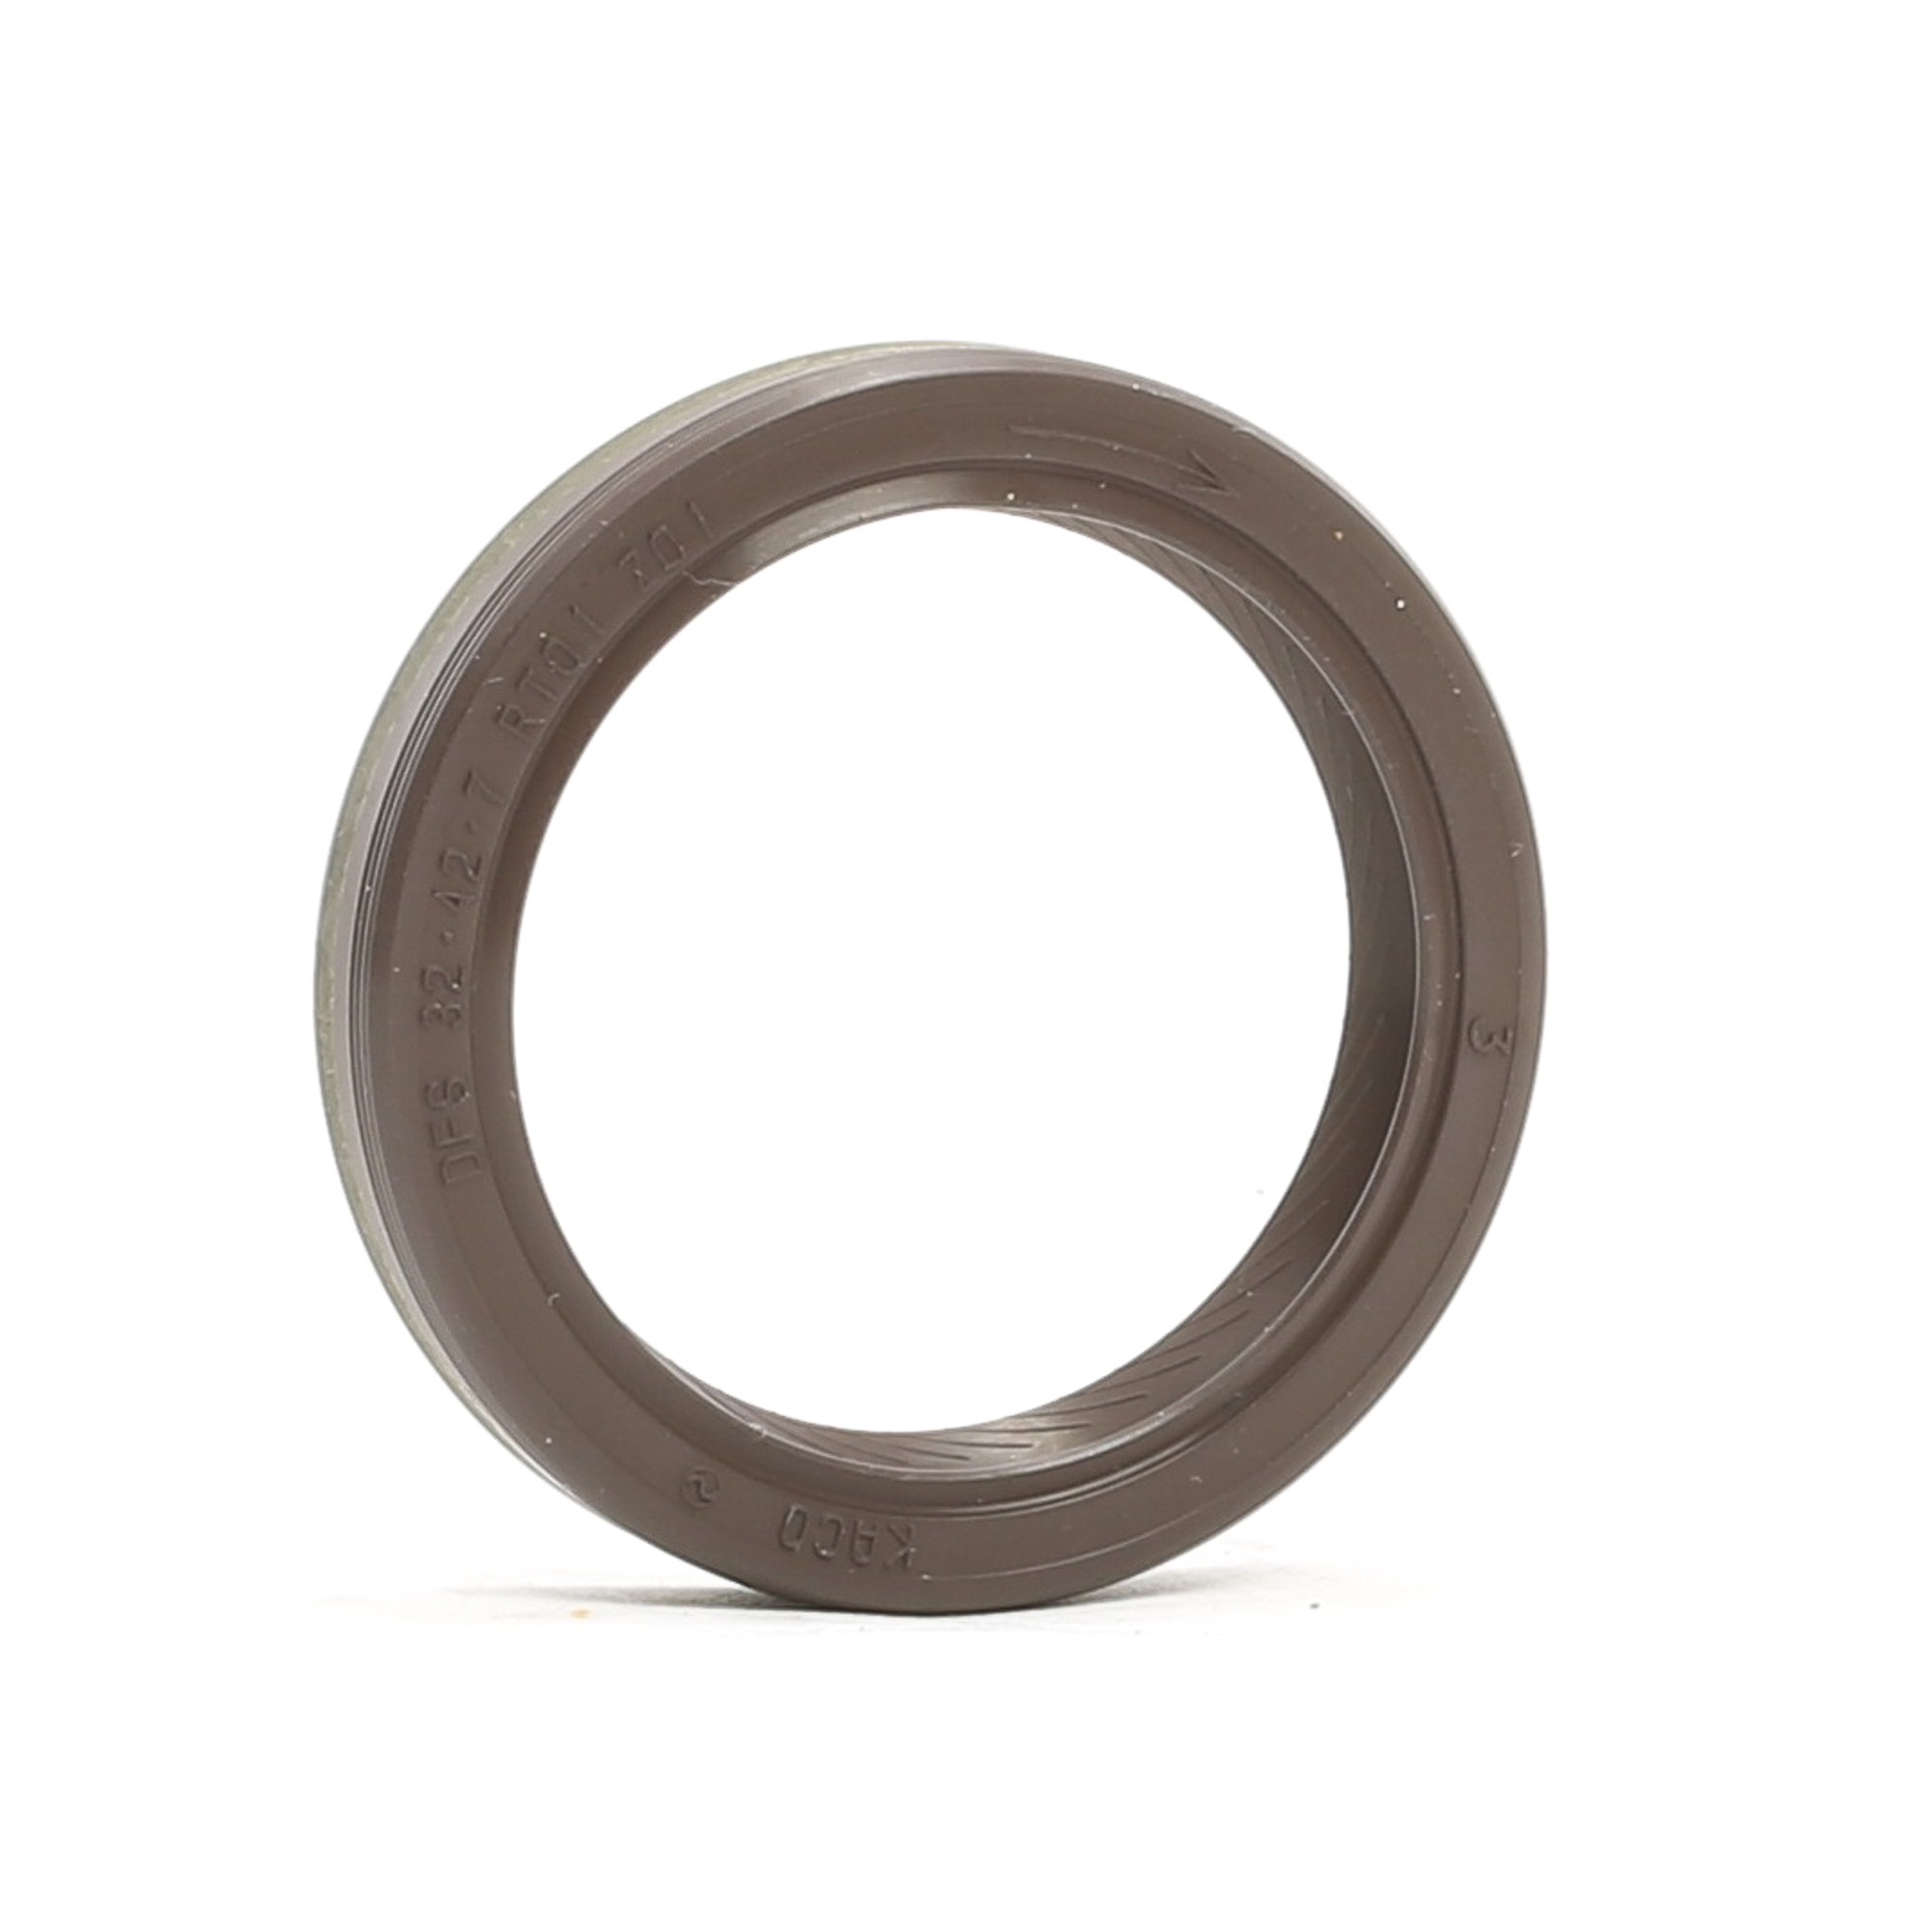 V10-3259 VAICO Crankshaft oil seal JEEP Q+, original equipment manufacturer quality MADE IN GERMANY, frontal sided